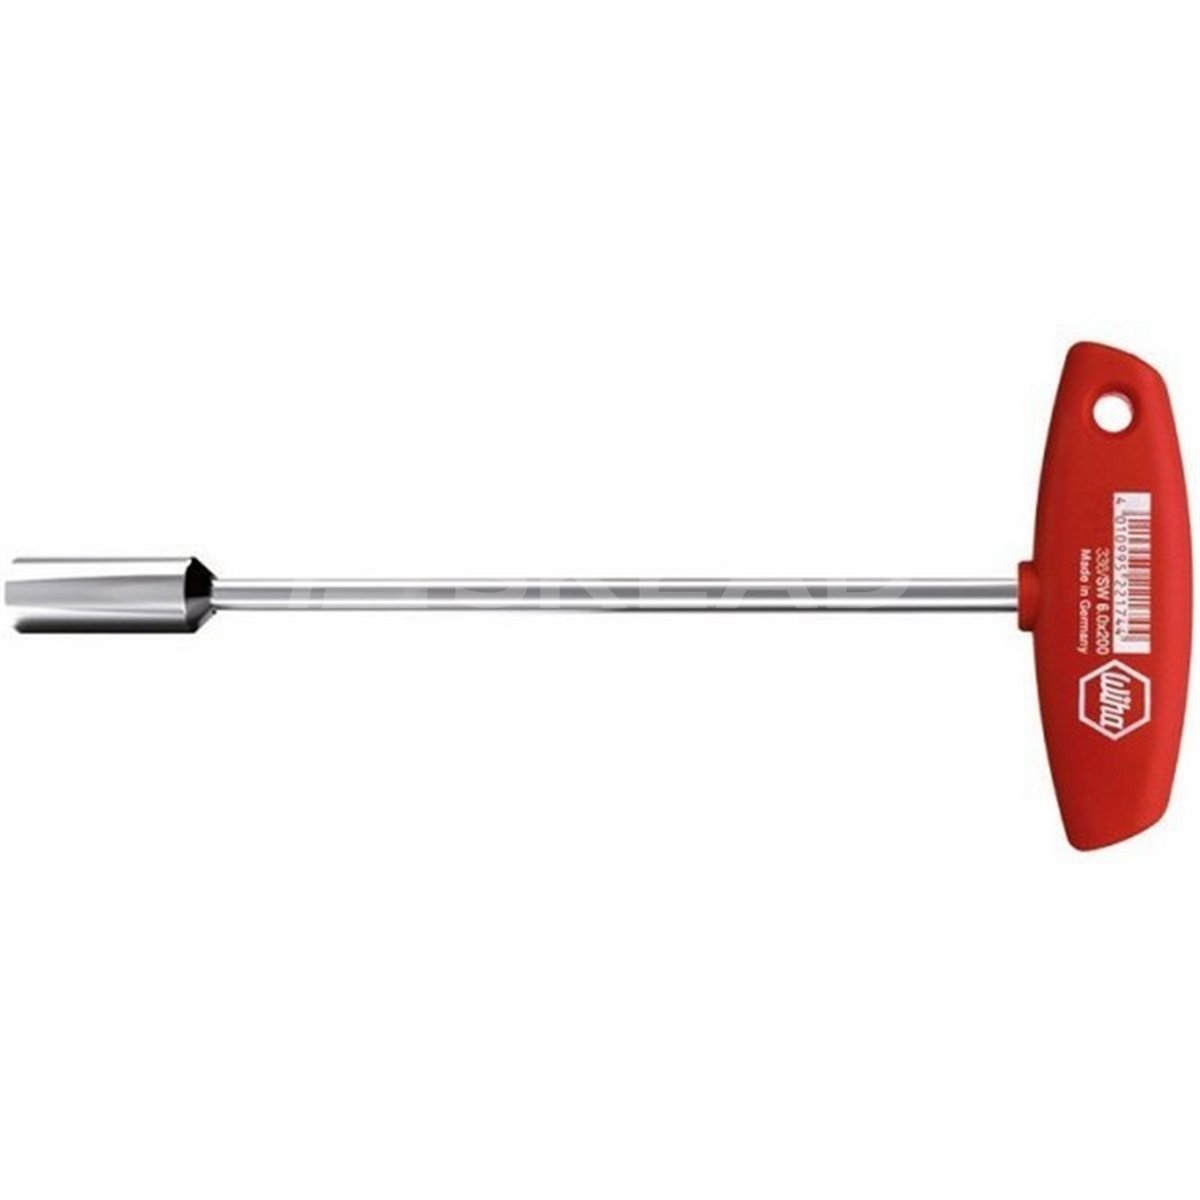 Socket wrench with T-handle. Classic 336 16 125mm Wiha 00994.